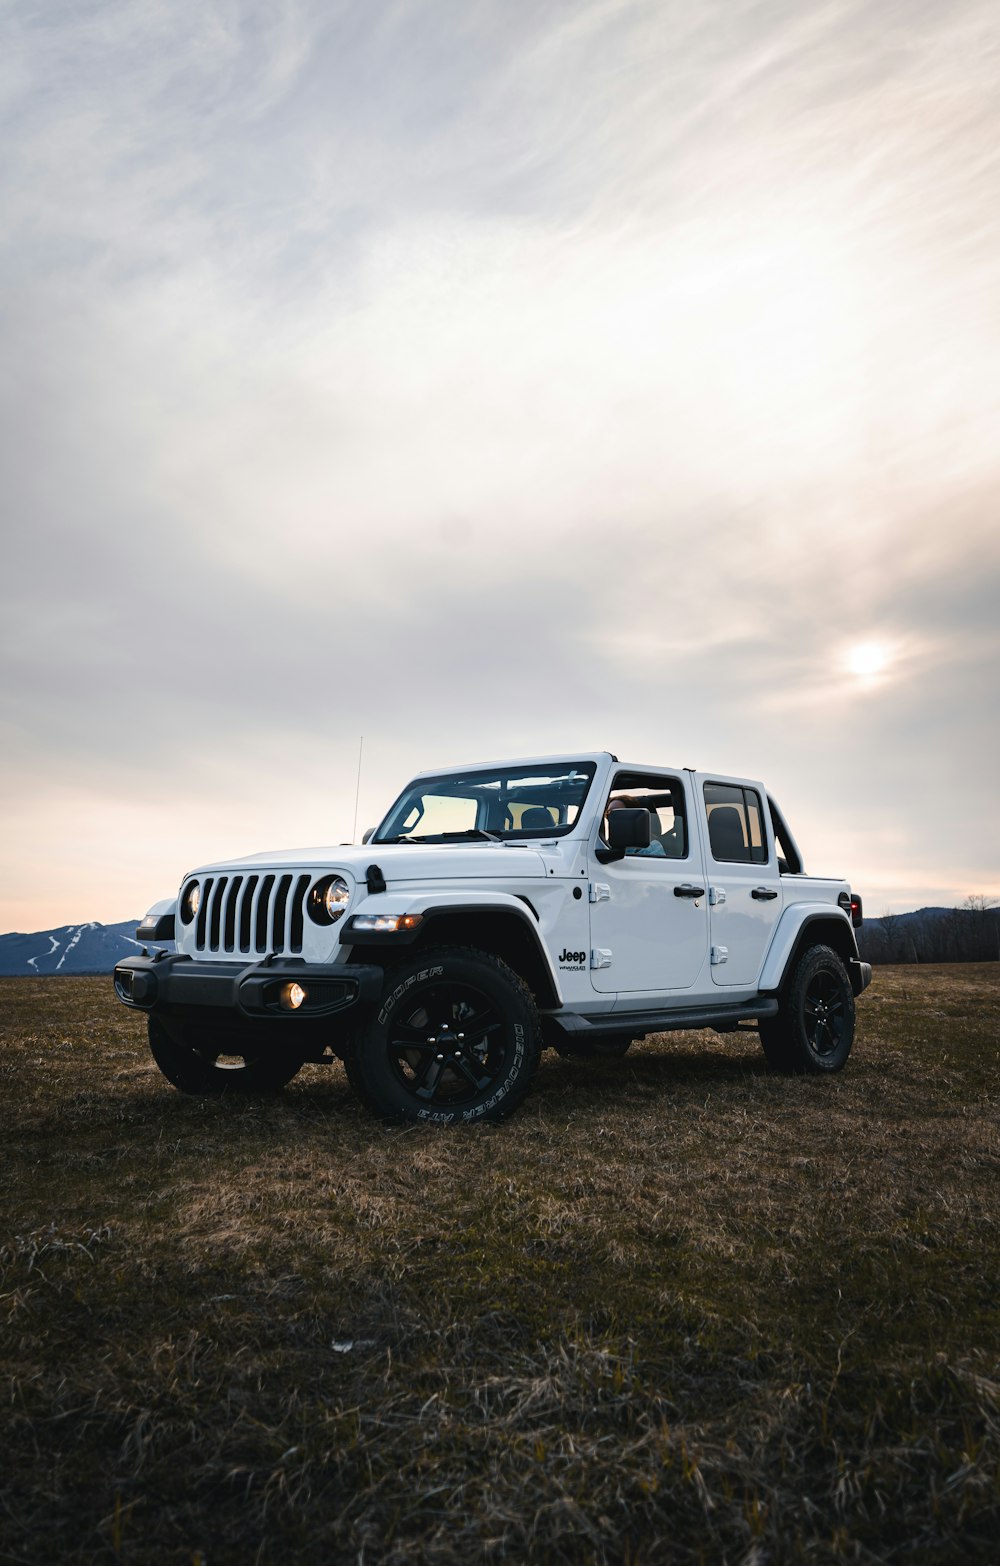 Jeep Wrangler Pictures Download Free Images On Unsplash